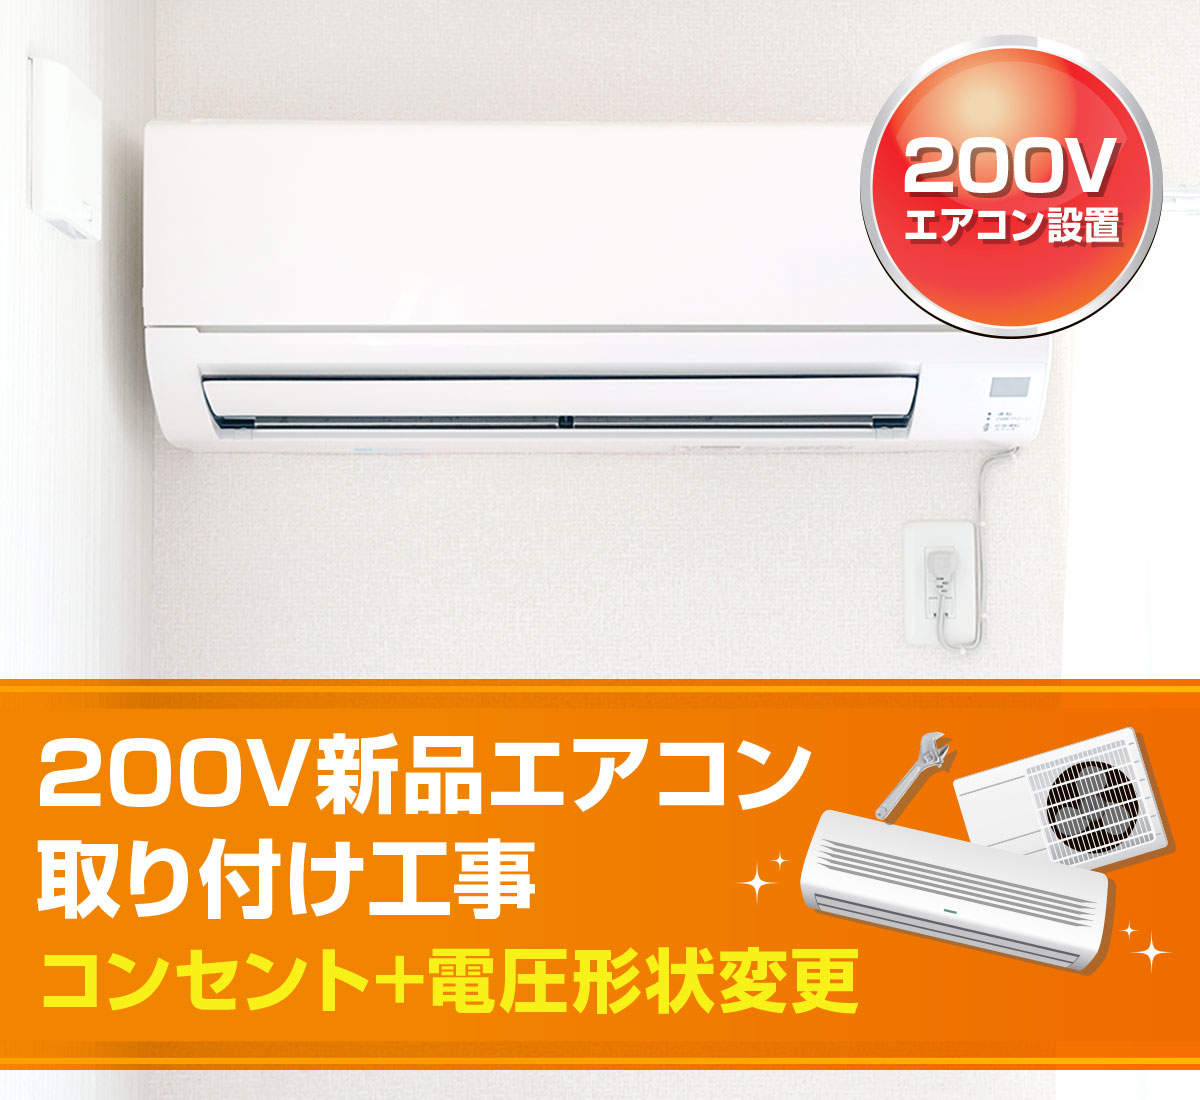 200V 新品エアコン取り付け工事 コンセント＋電圧形状変更